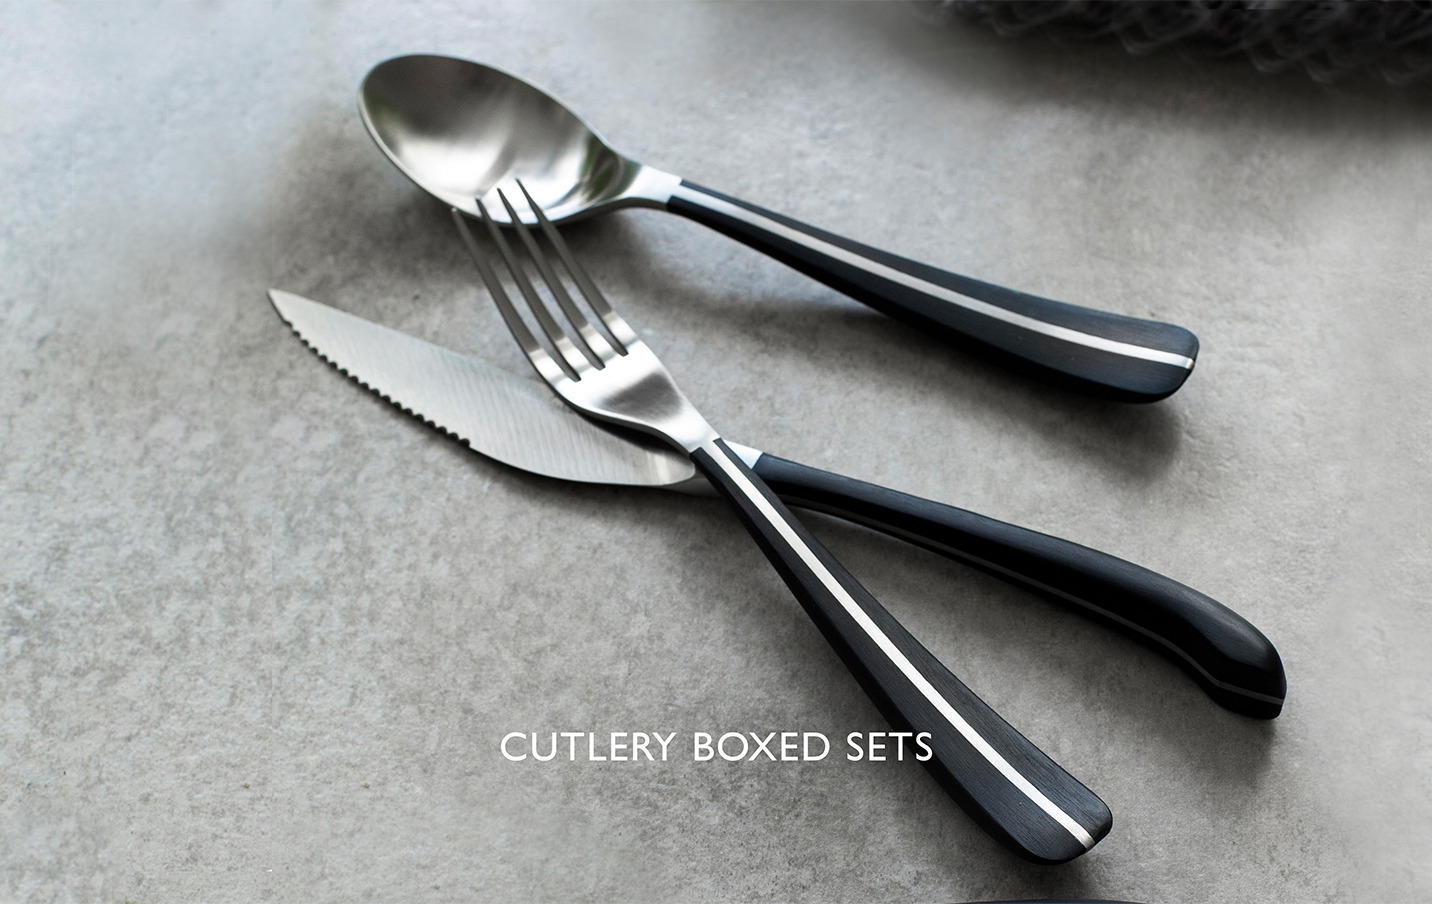 Cutlery Boxed Sets